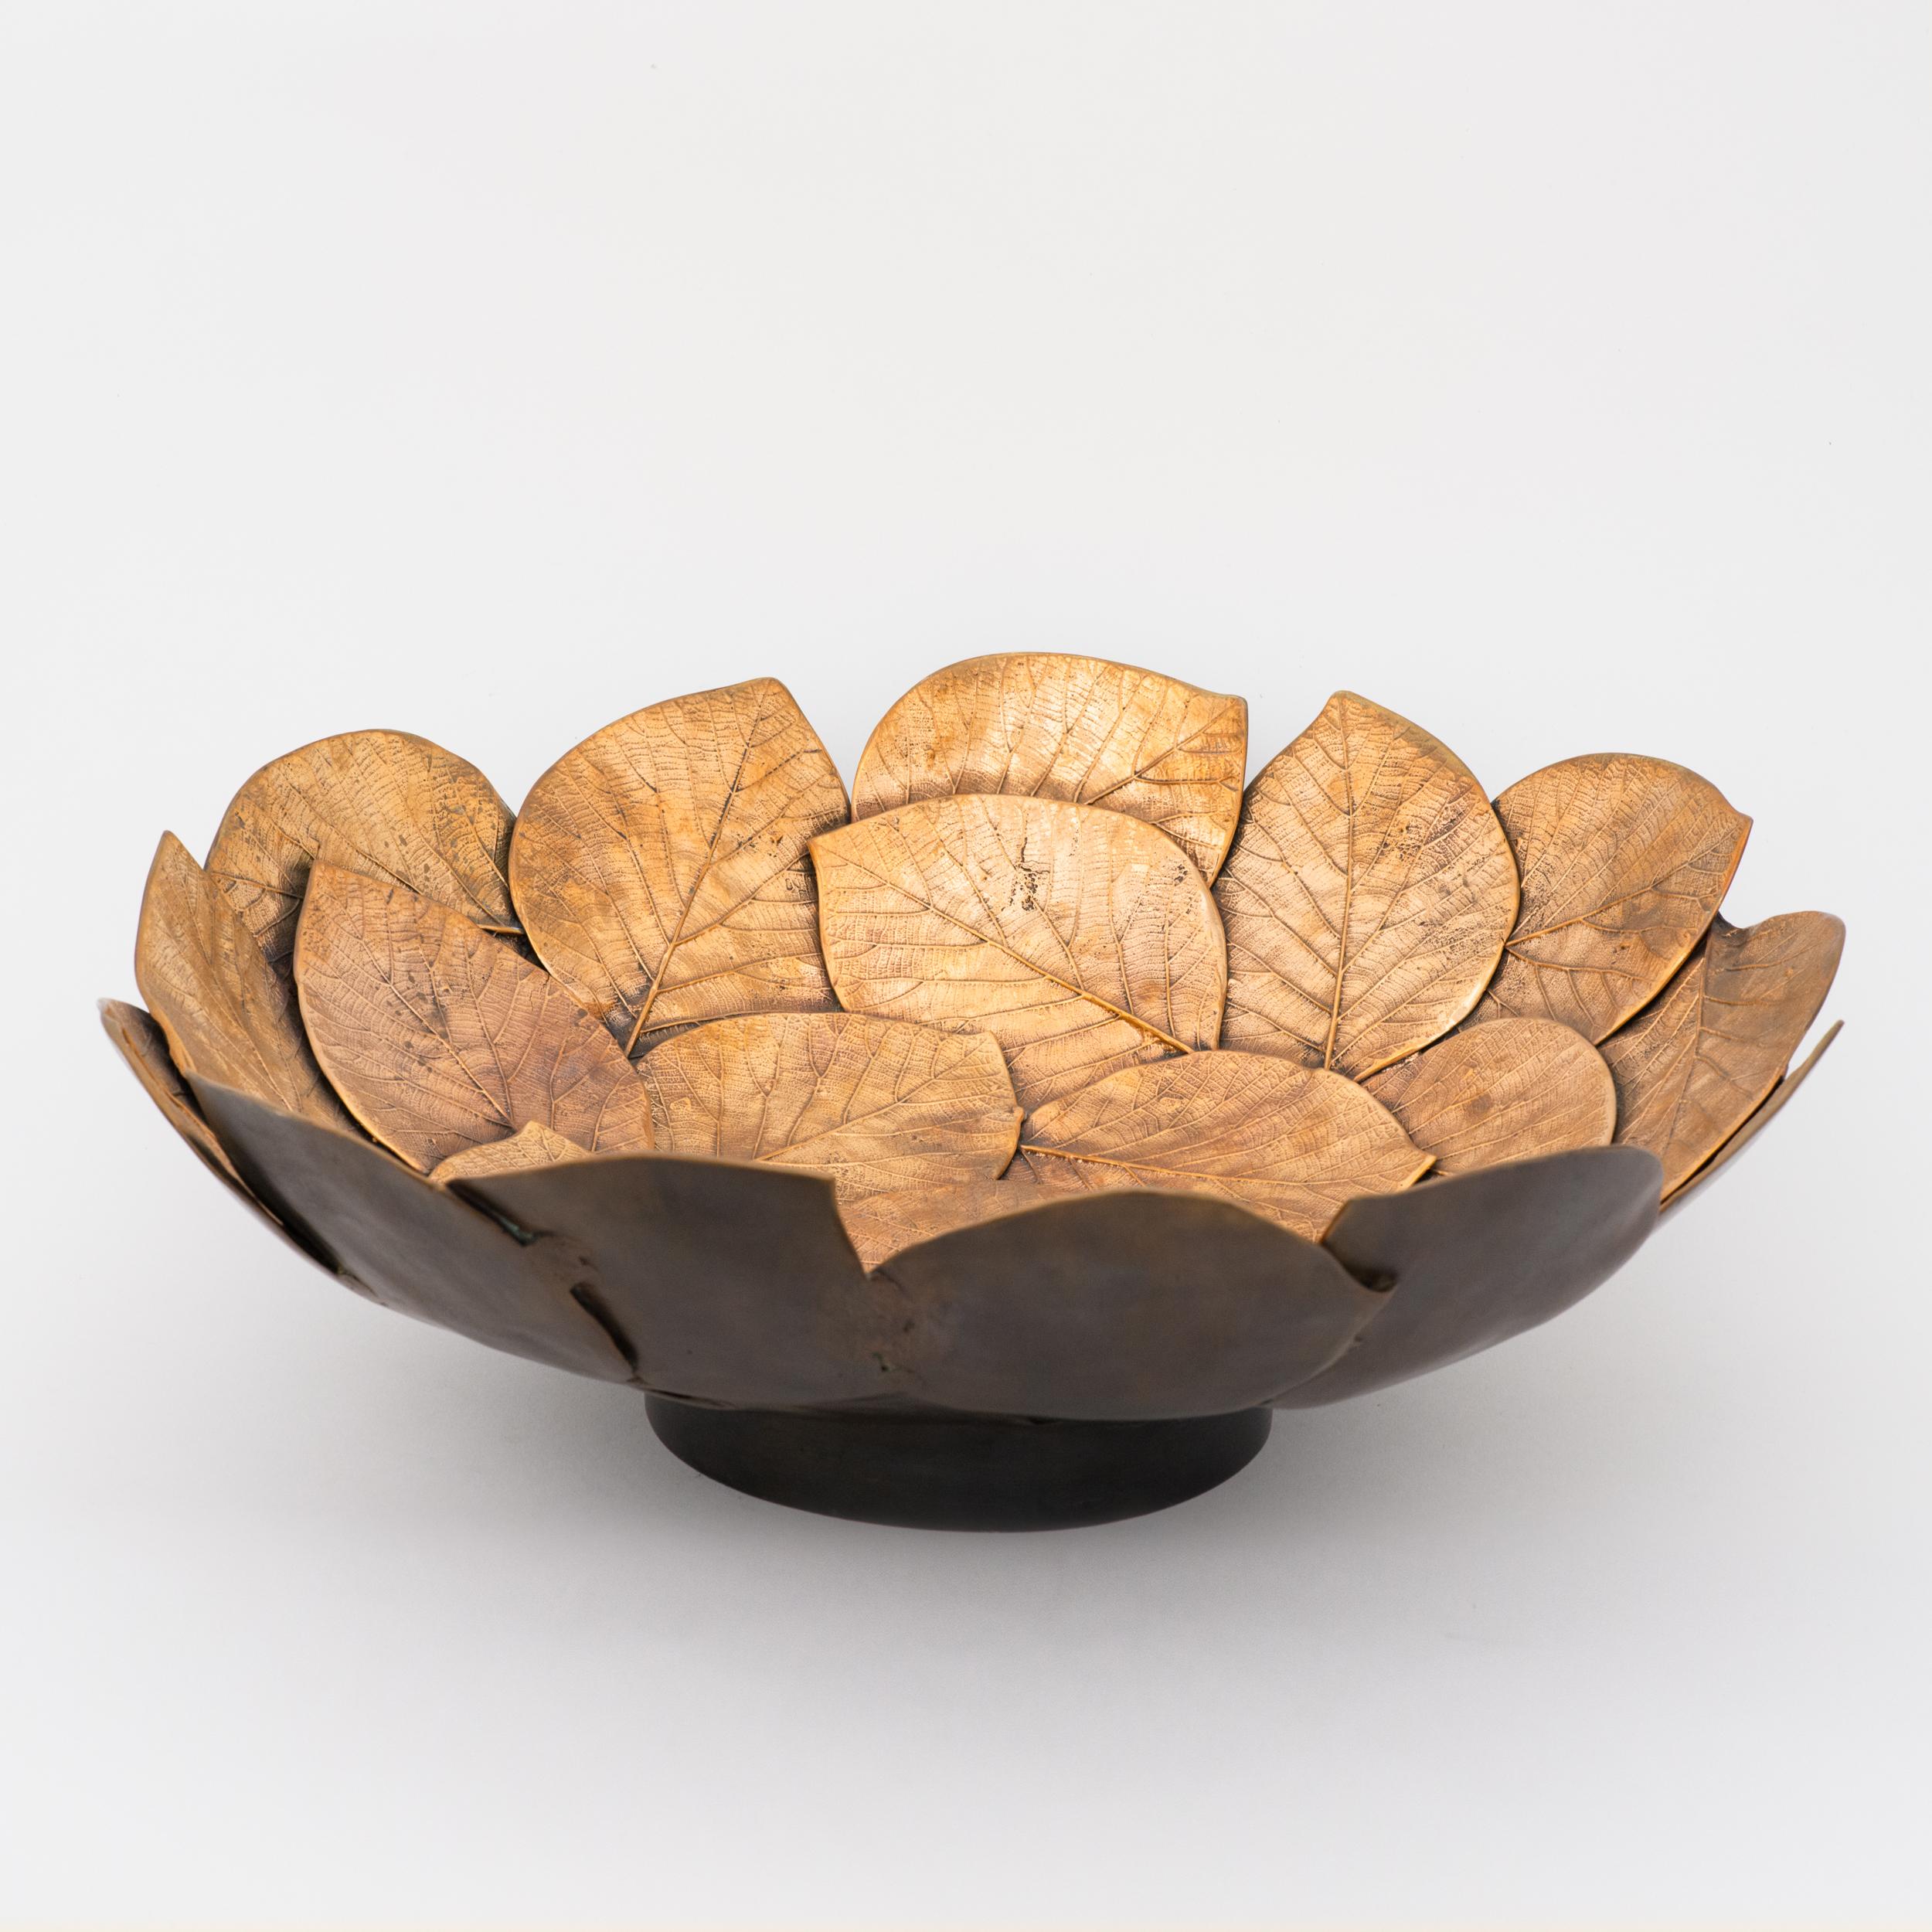 Unique and exquisite brass cast leaf bowl, part of a special edition. 

Handmade using highly skilled and specialised traditional processes to create an original and sumptuous piece.

Slight variations in the patina and polished finishes, patterns